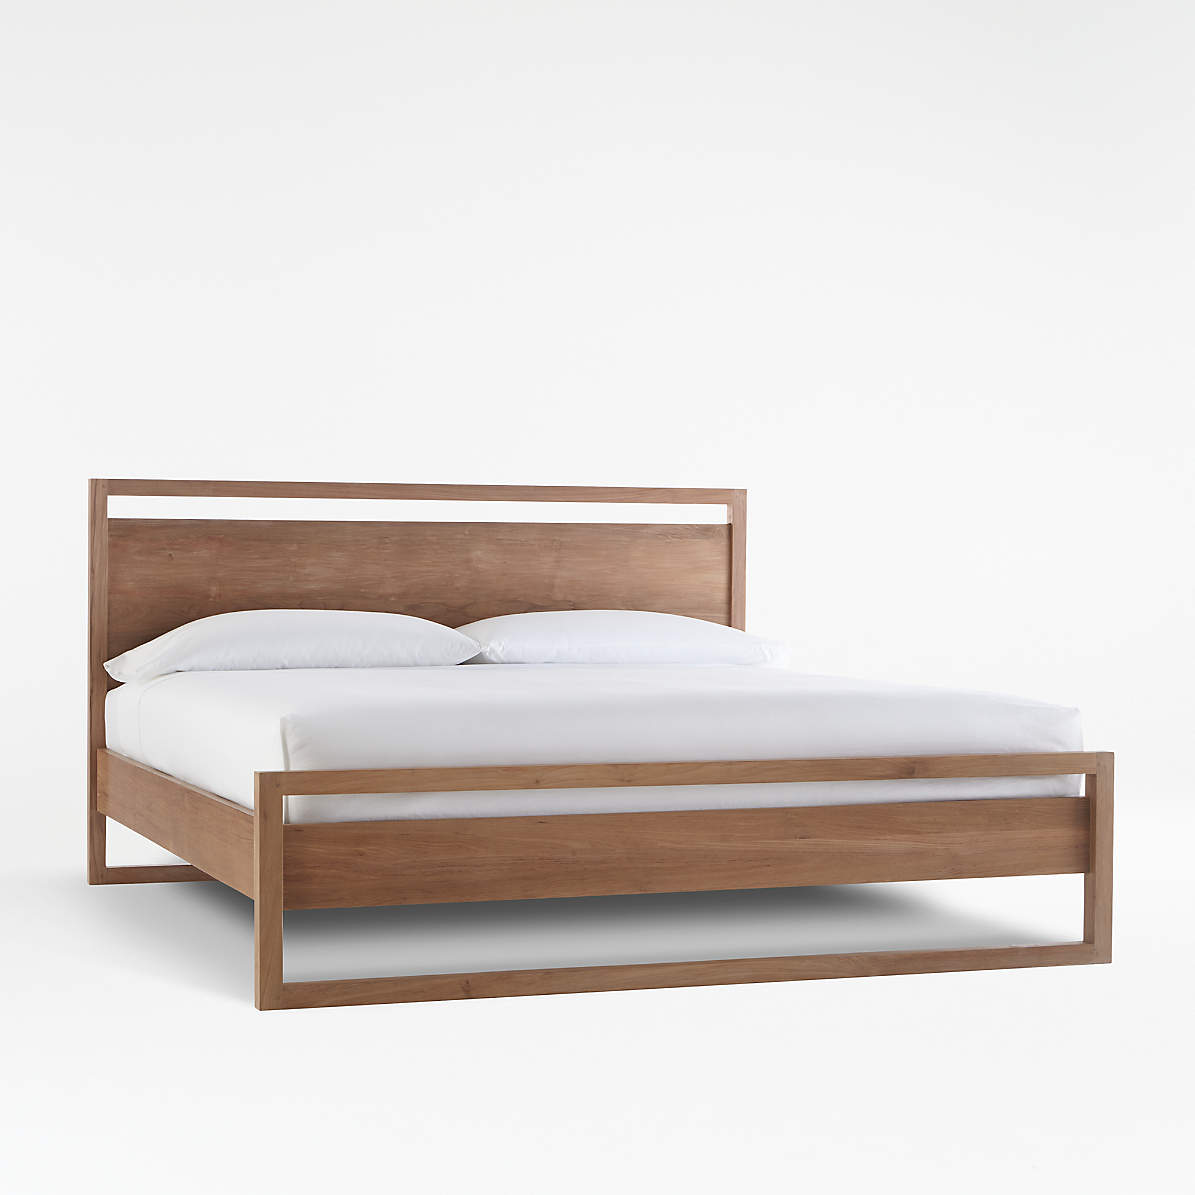 Linea Ii King Bed Reviews Crate And, King Bed And Frame